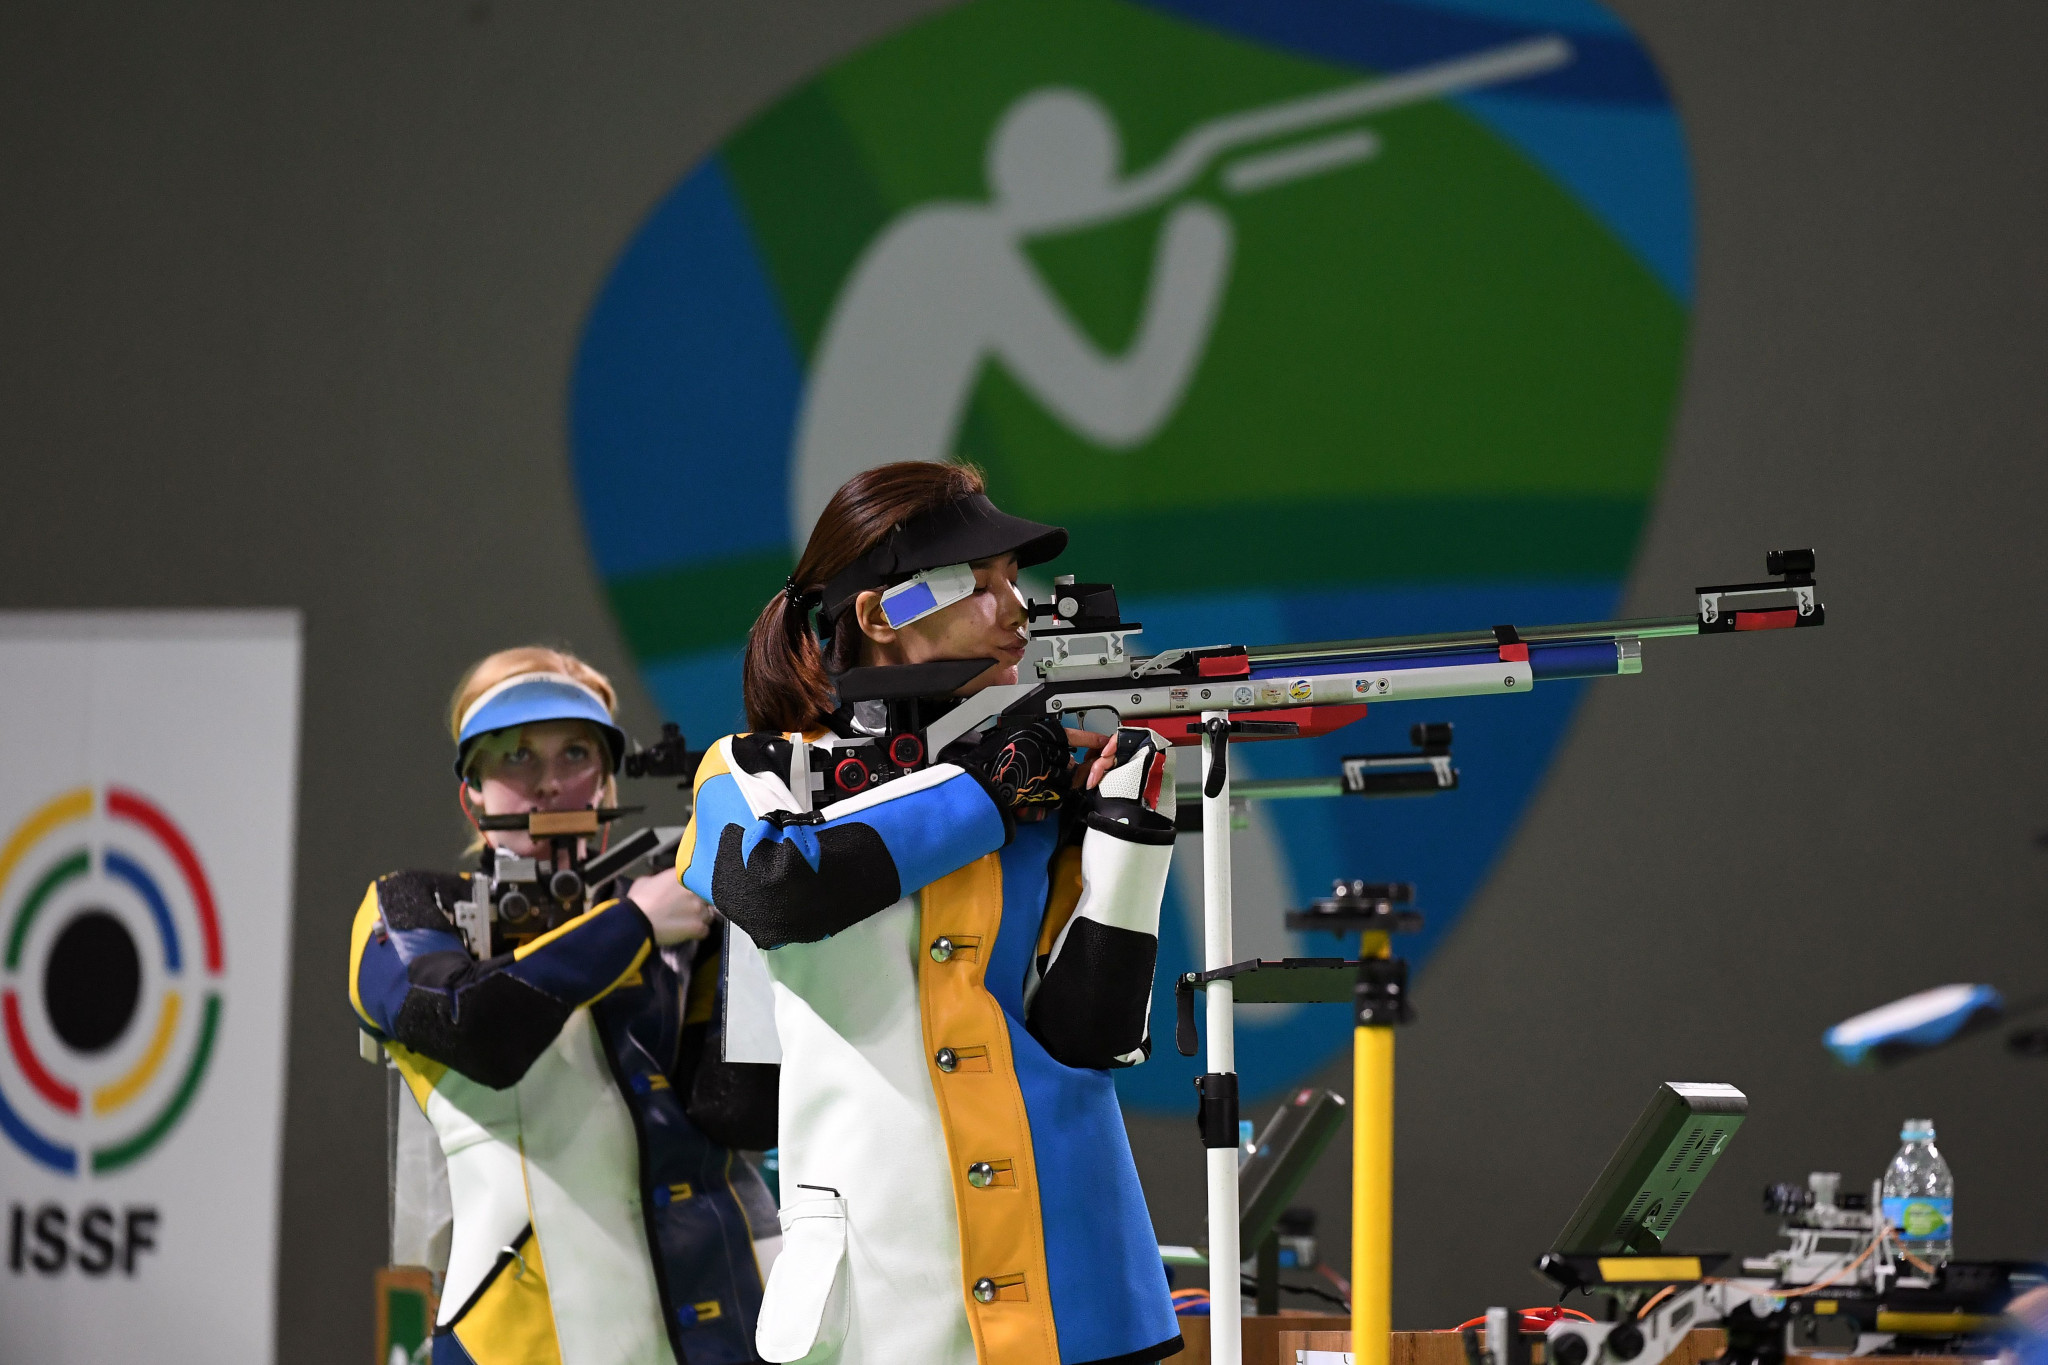 Women to fire equal number of shots under new ISSF rules